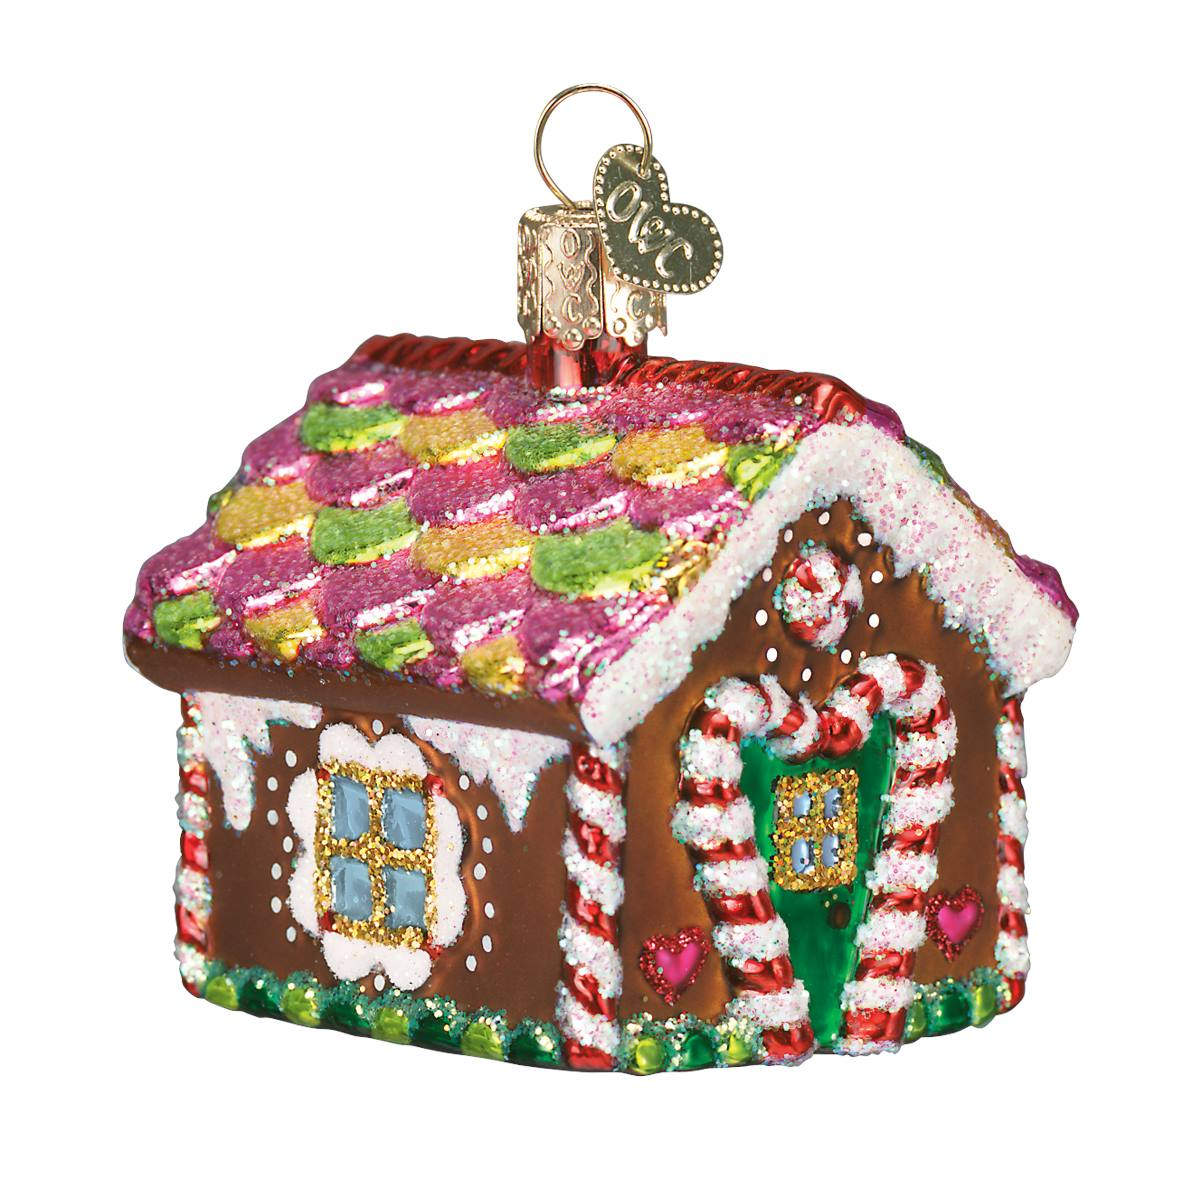 Small Gingerbread House Ornament